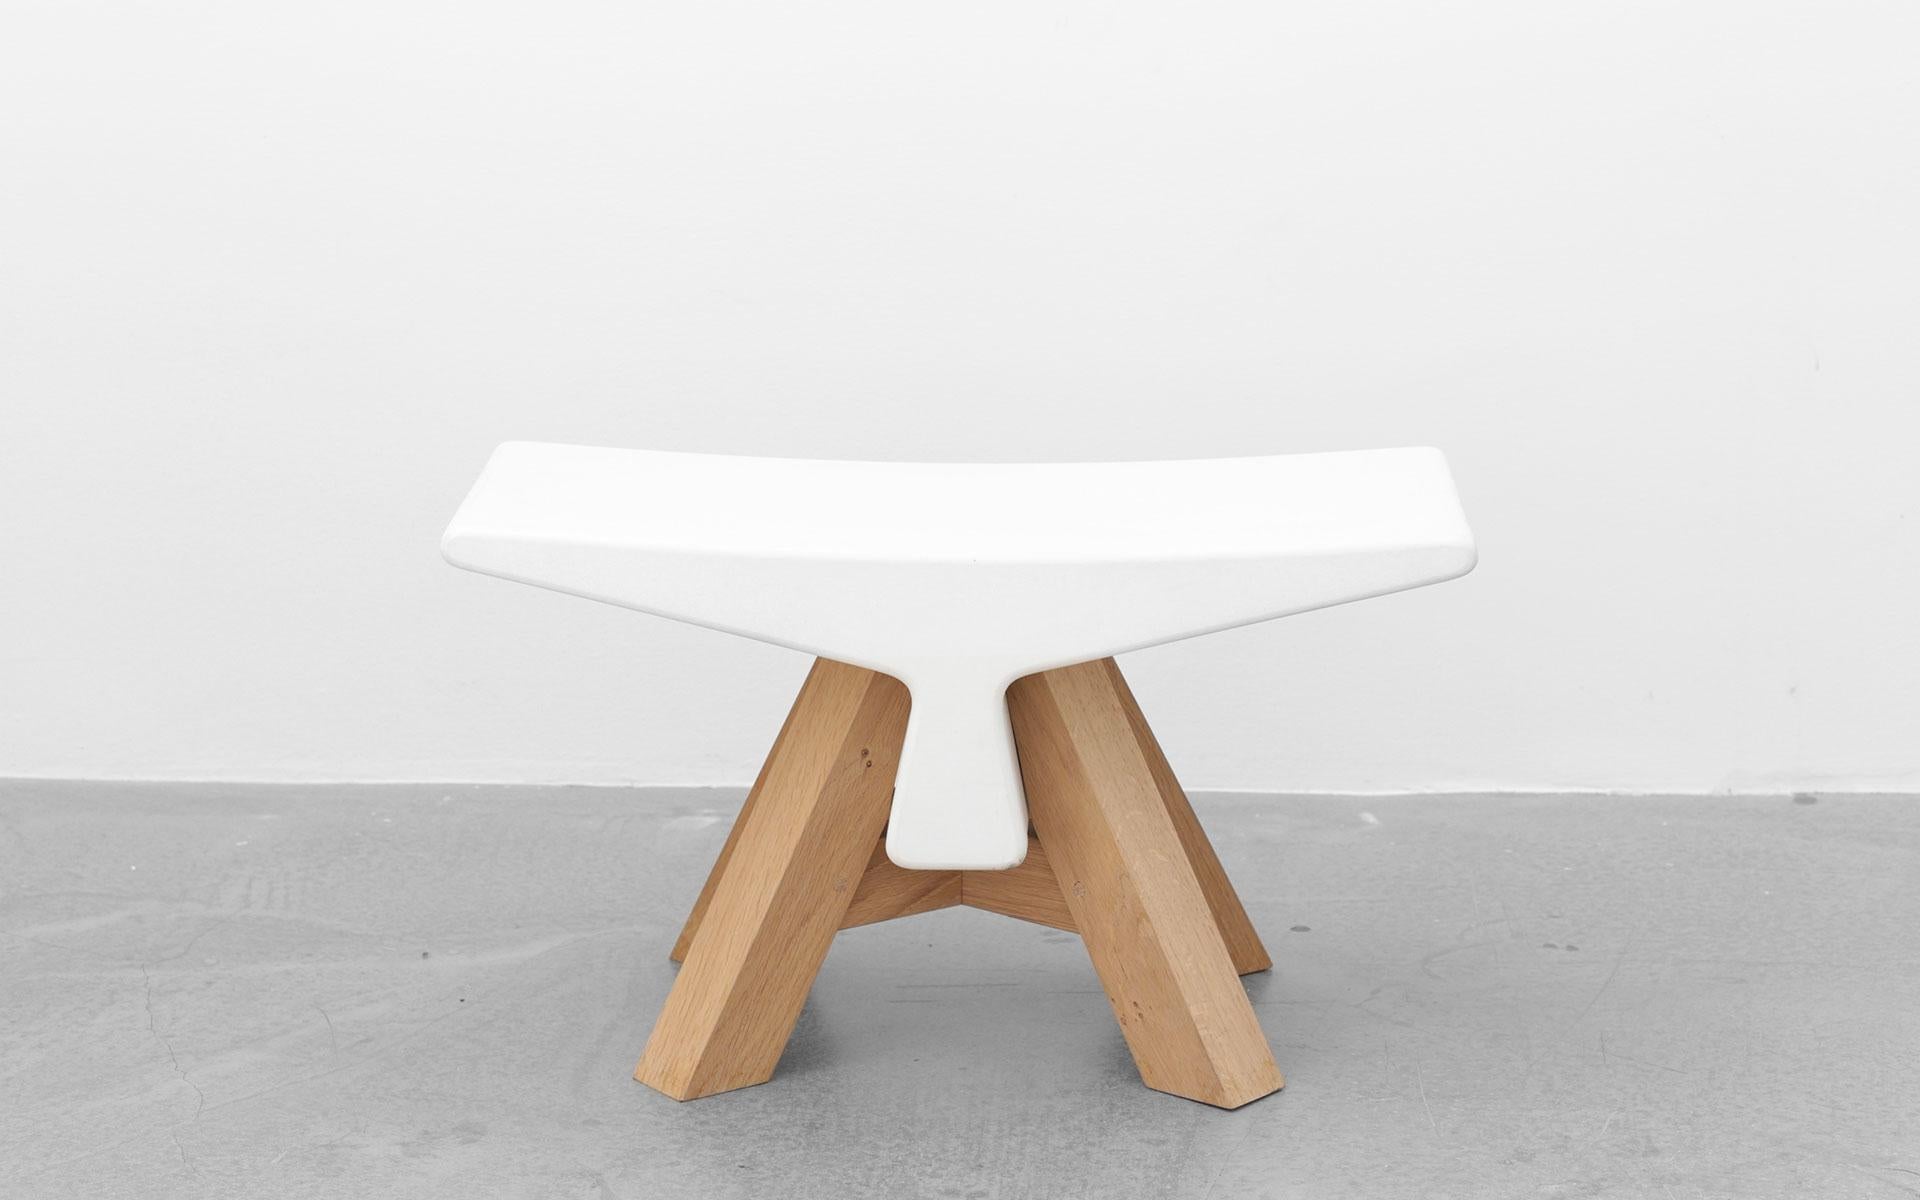 Hand-Crafted Bone Ductal, Stool in Oak and Light Grey Concrete, Ymer&Malta, France For Sale